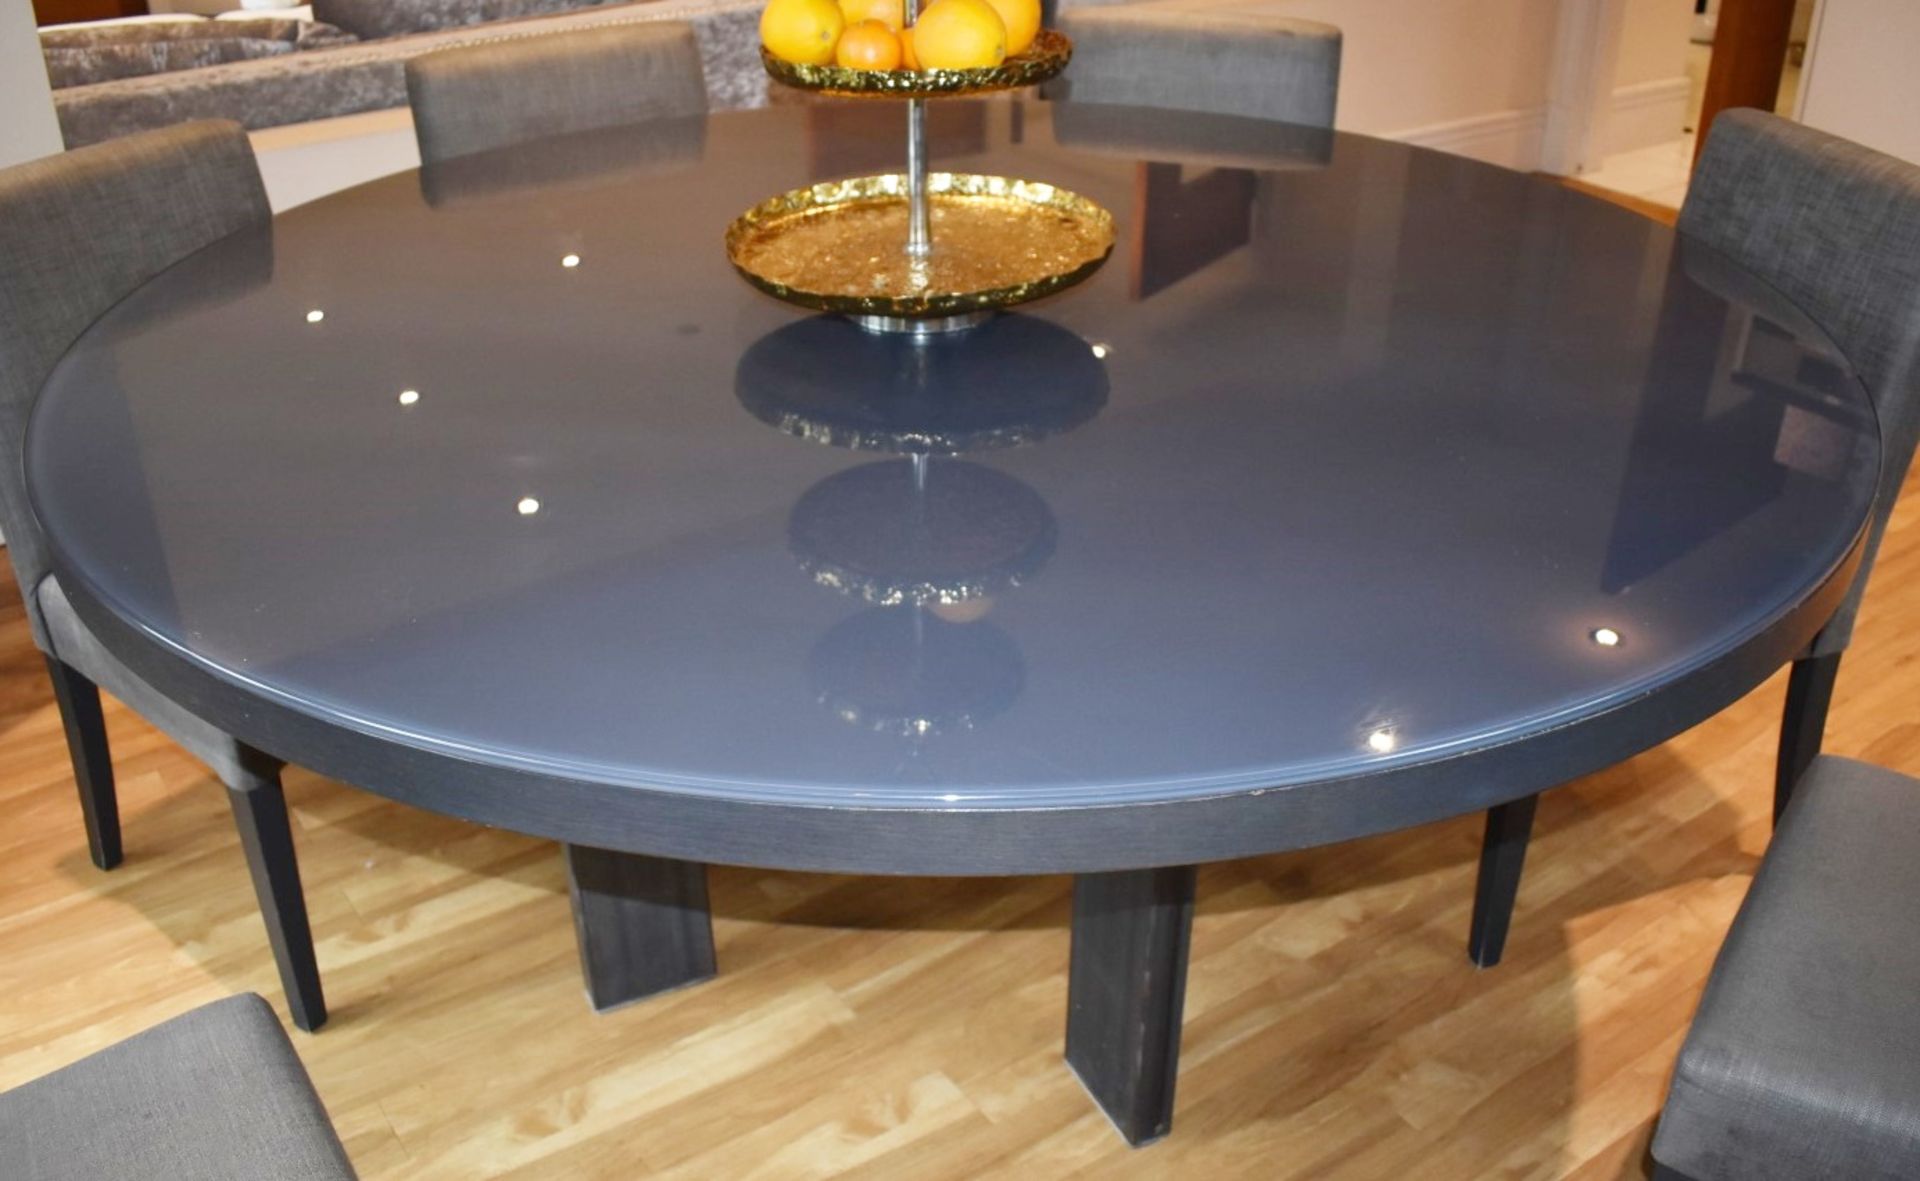 1 x Contemporary Dining Table With Six Chairs - Wenge Wood Round Table With Glass Protector and - Bild 3 aus 14